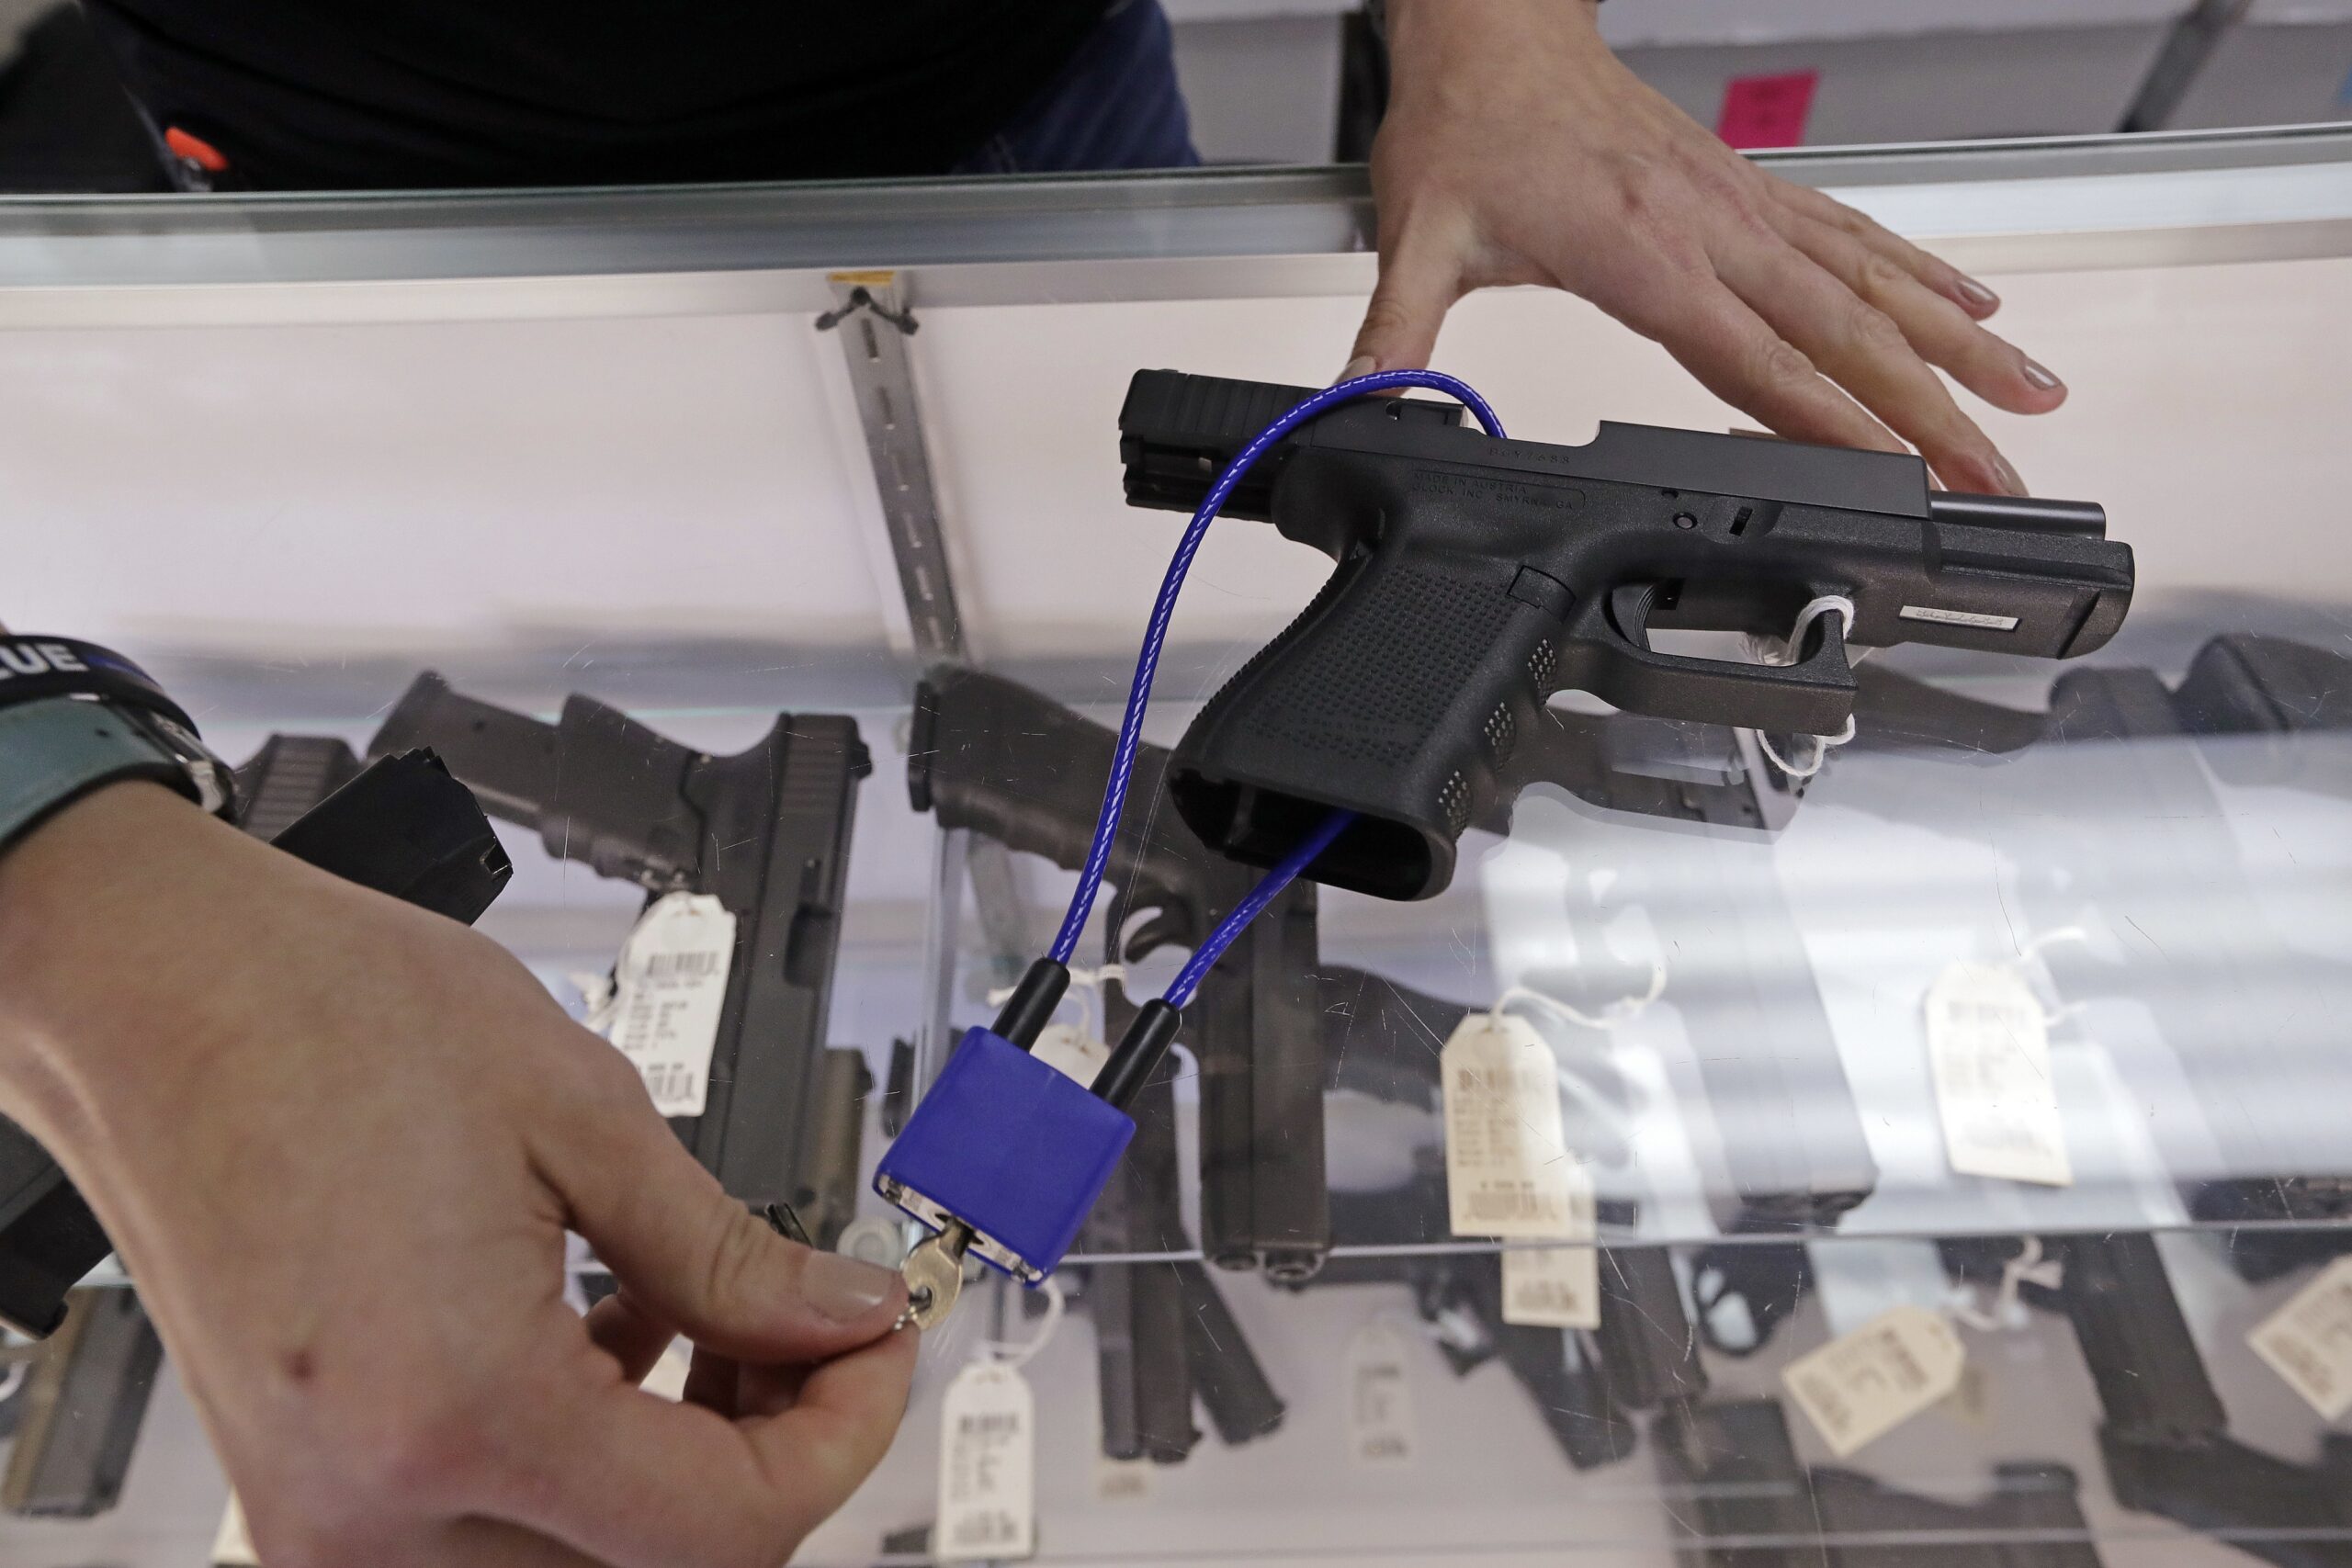 Gun retailers could help with suicide prevention under GOP bill